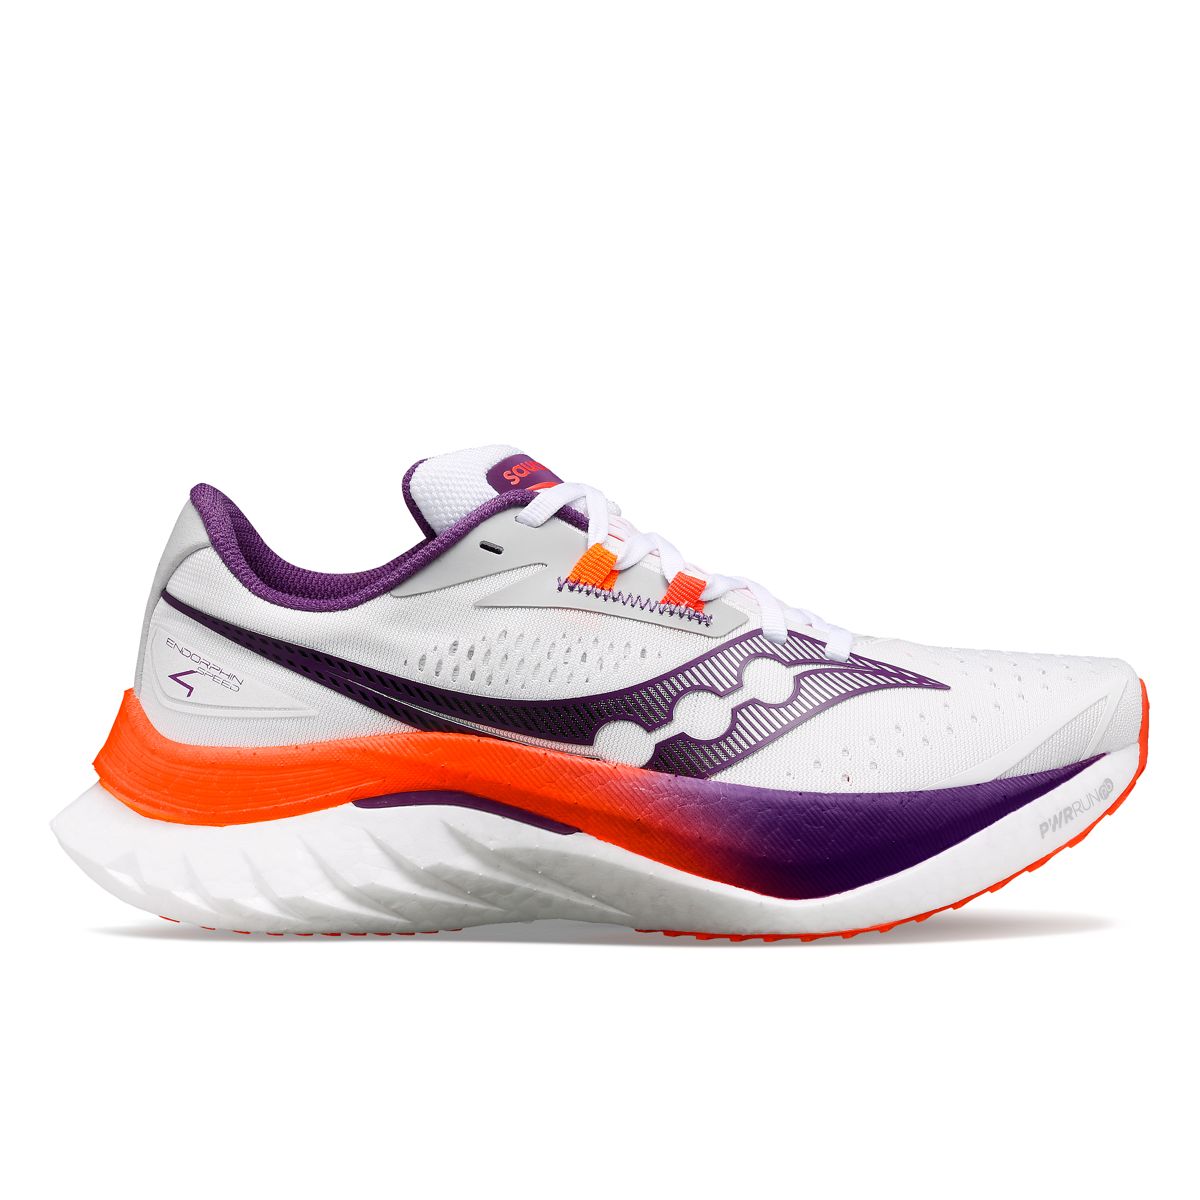 Mesh 5 Carbon Haze Coral Womens Sport Shoes - Get Best Price from  Manufacturers & Suppliers in India